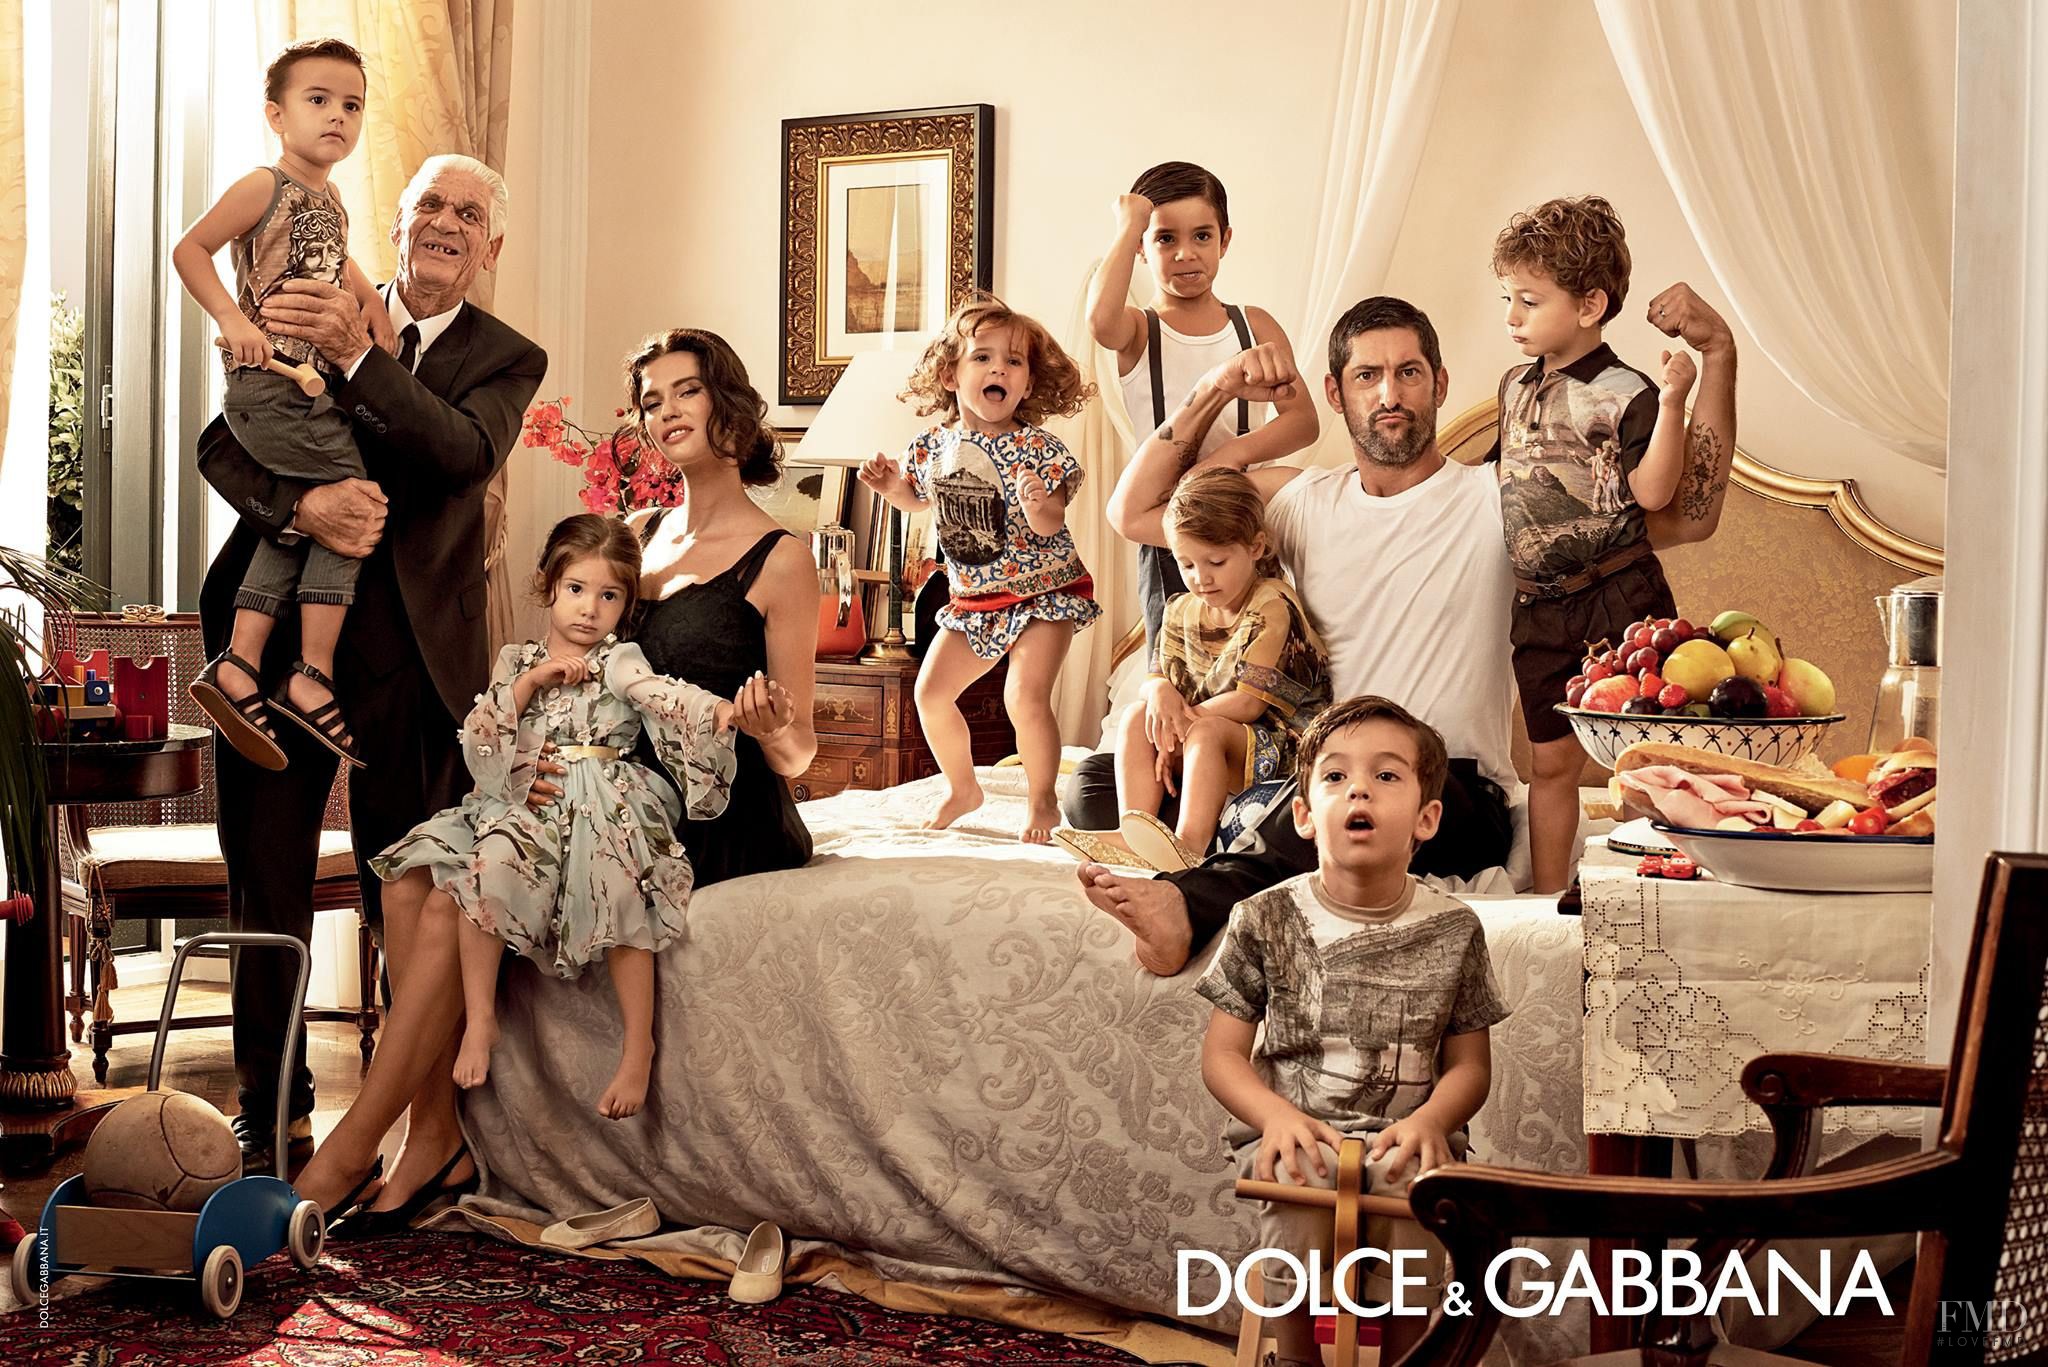 Dolce & Gabbana’s spring/summer 2014 campaign, shot in Taormina, Sicily, relies on the tropes of the traditional family and small-town life. Photograph by Domenico Dolce. 